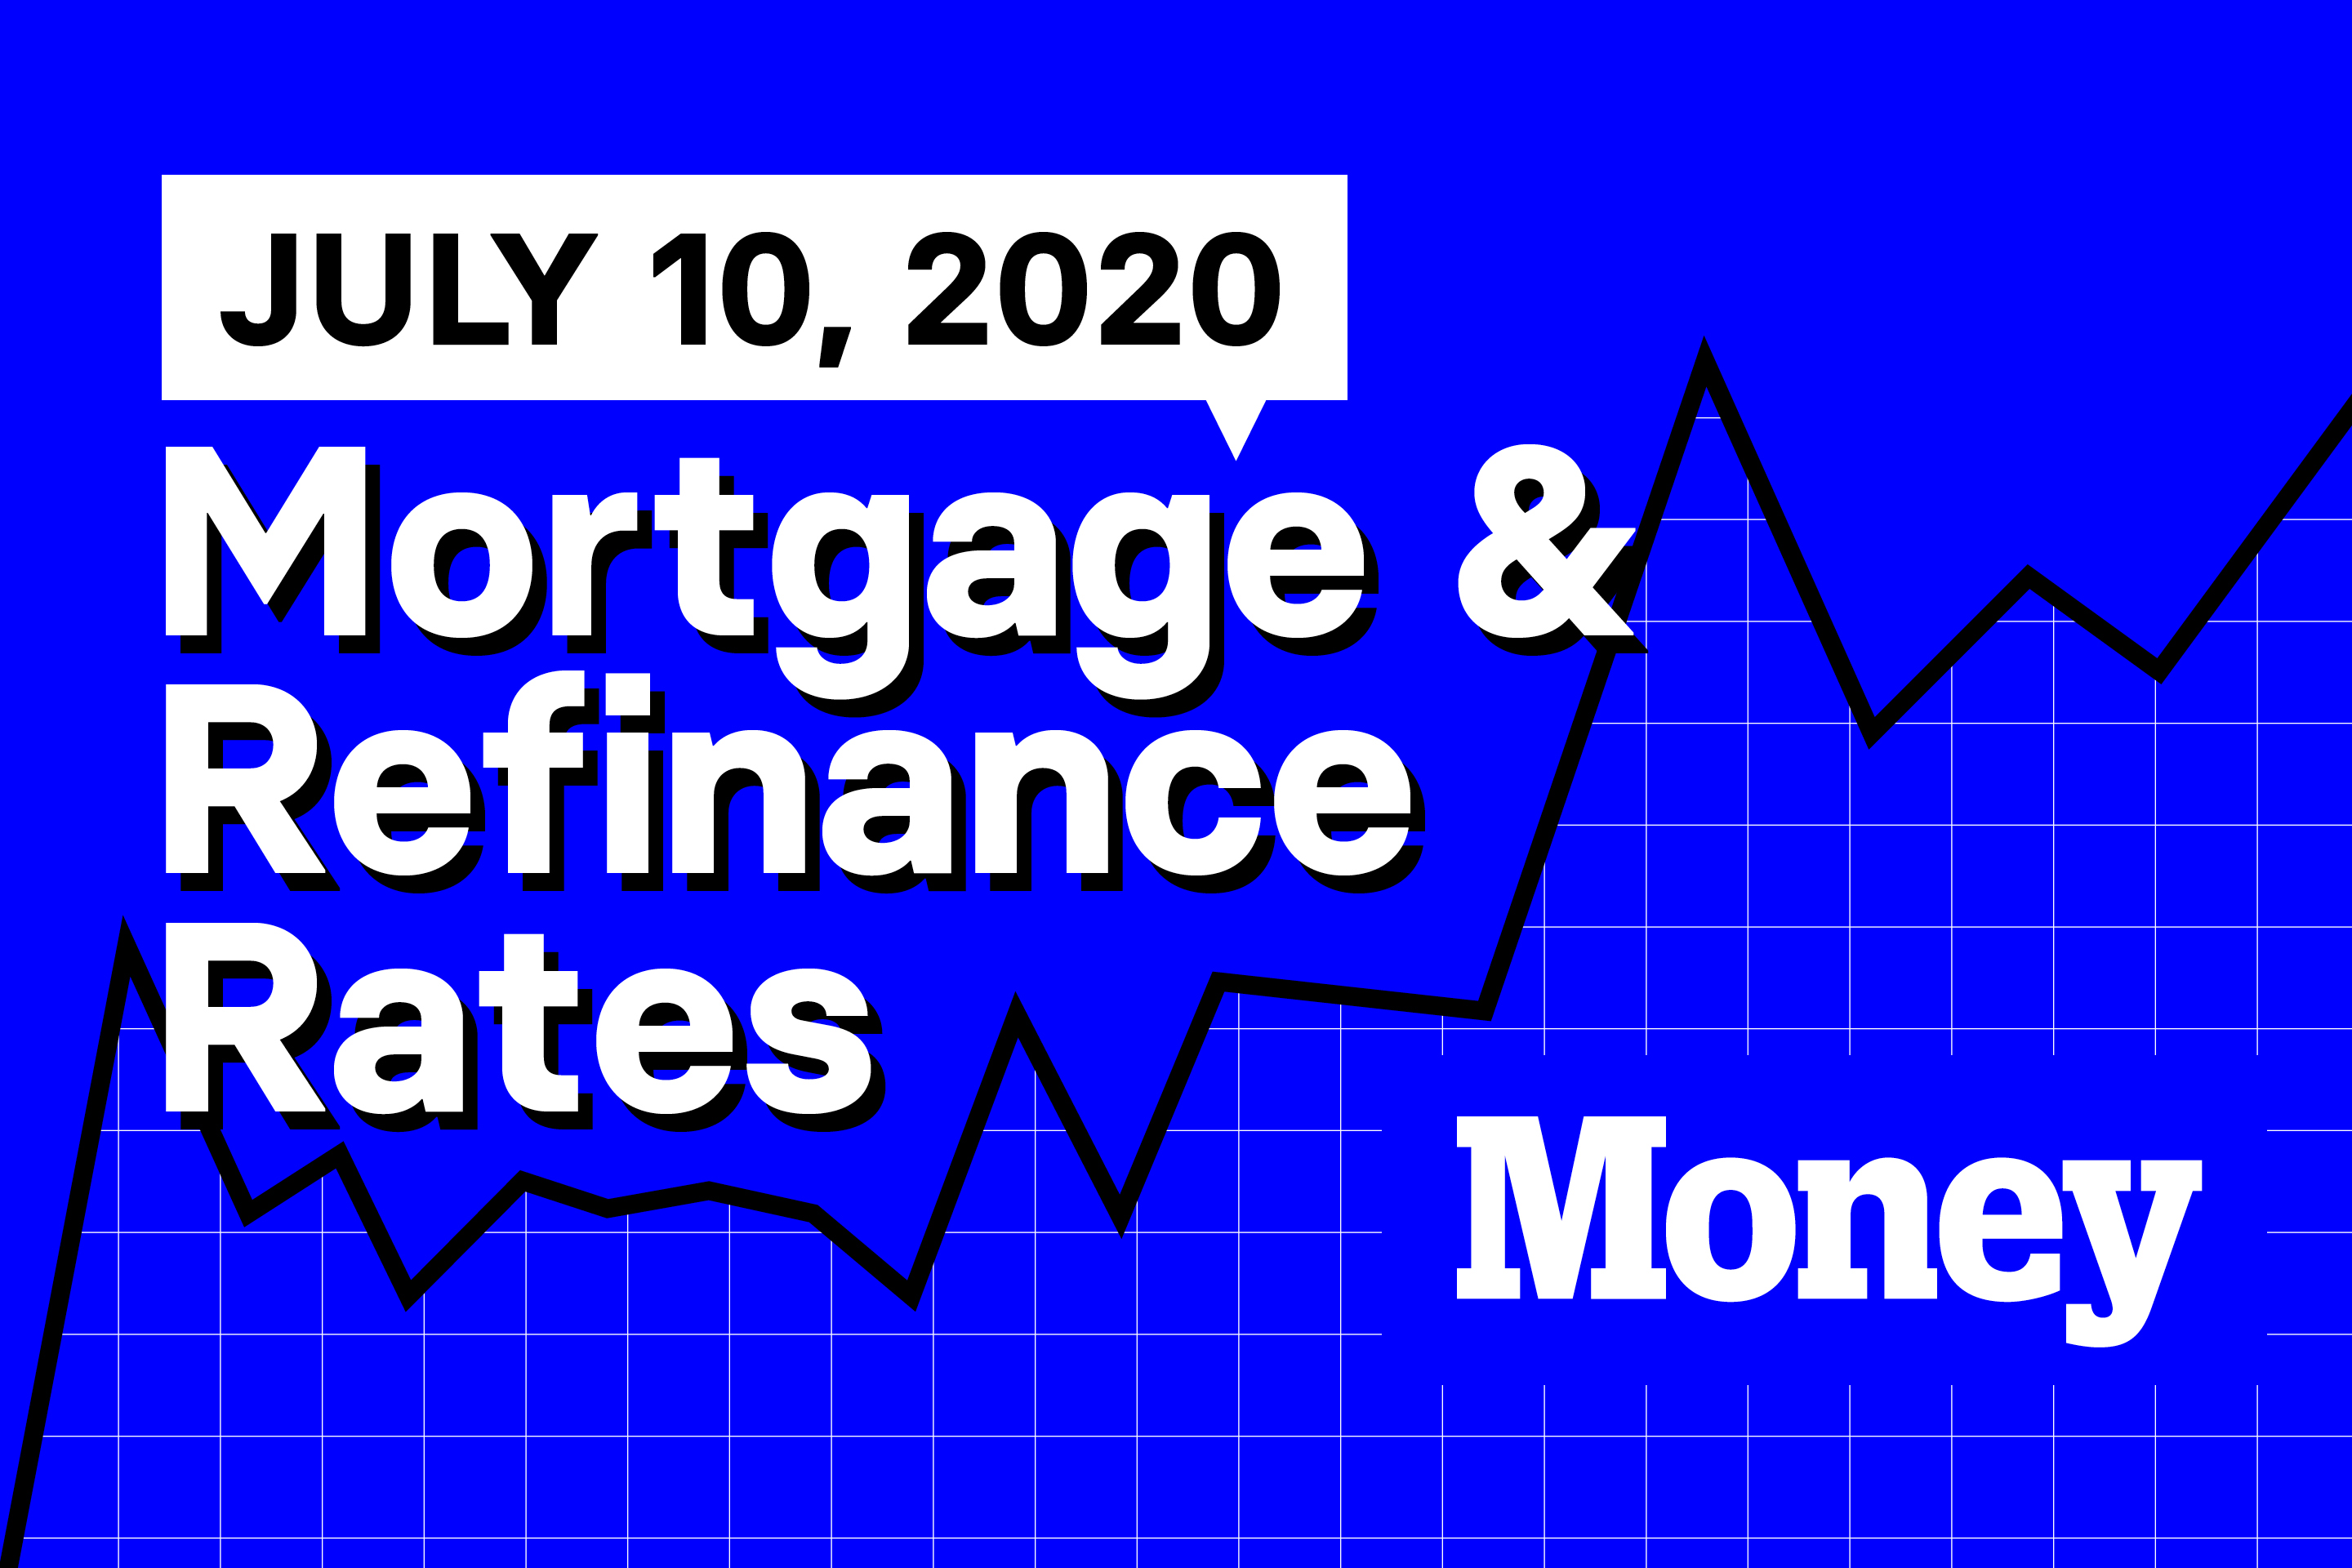 Here Are Today's Best Mortgage &amp; Refinance Rates for July 10, 2020